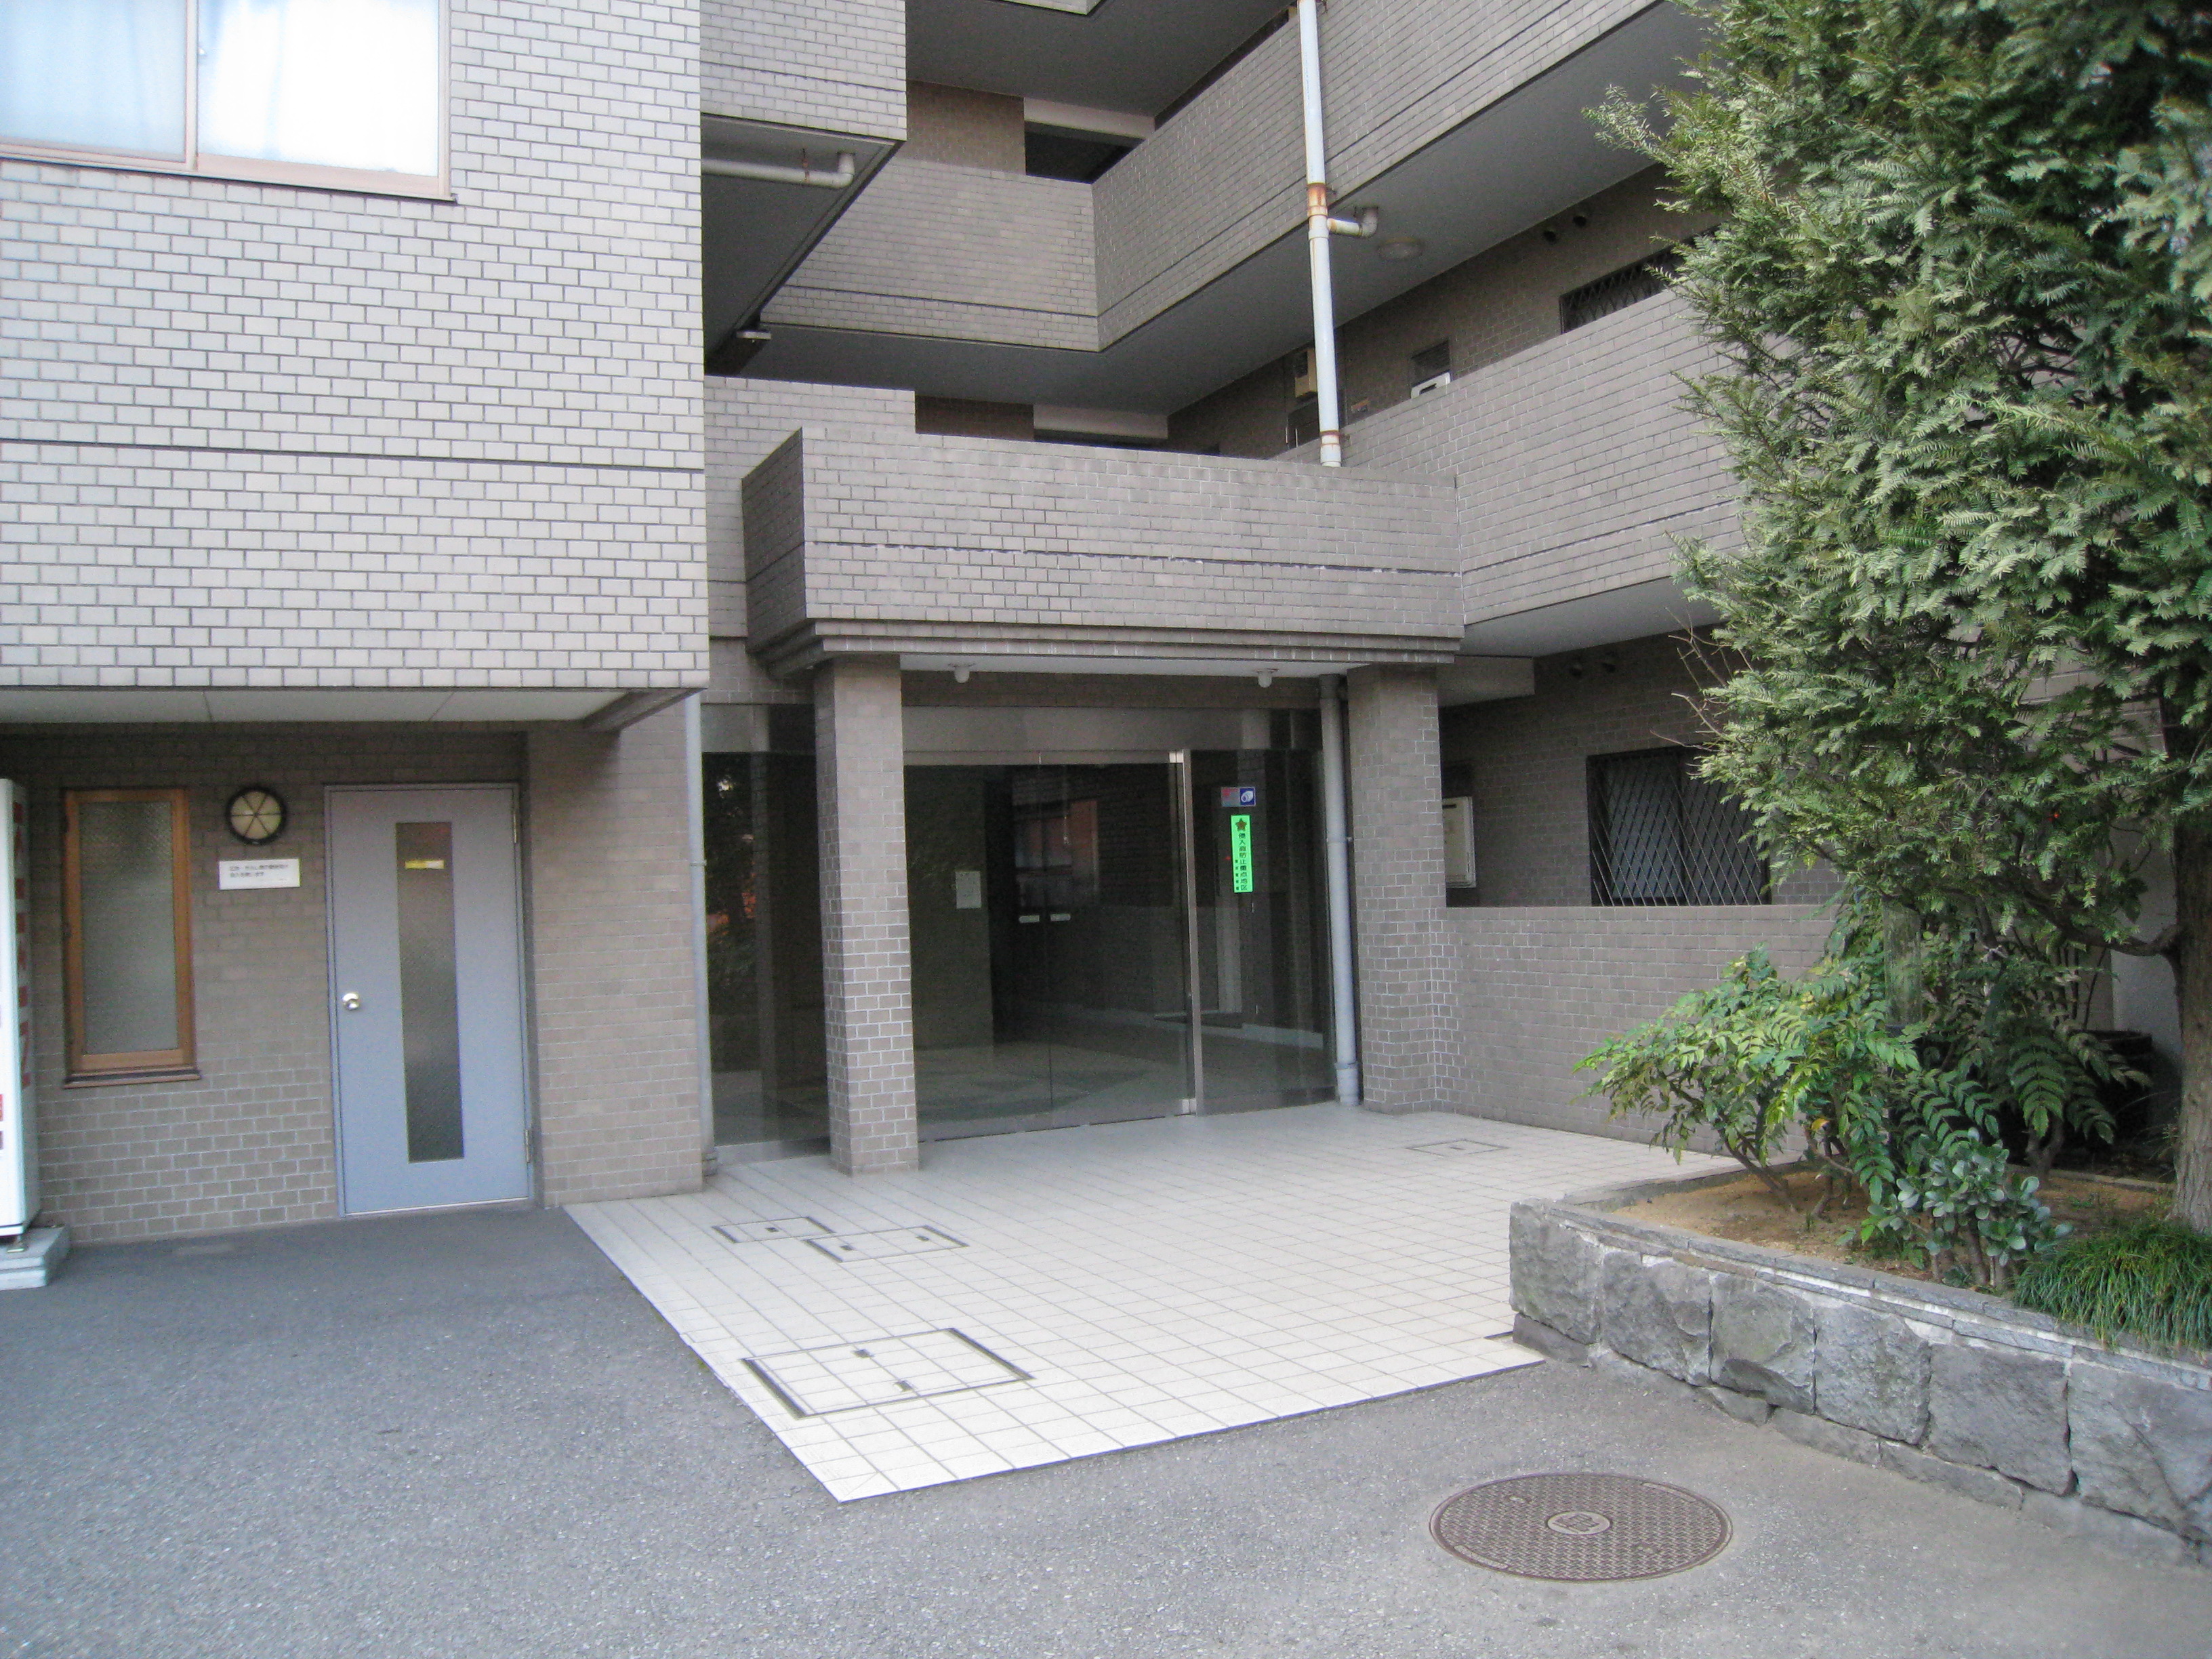 BEST-ESTATE.JP home and apartment-searching website in Japan 2